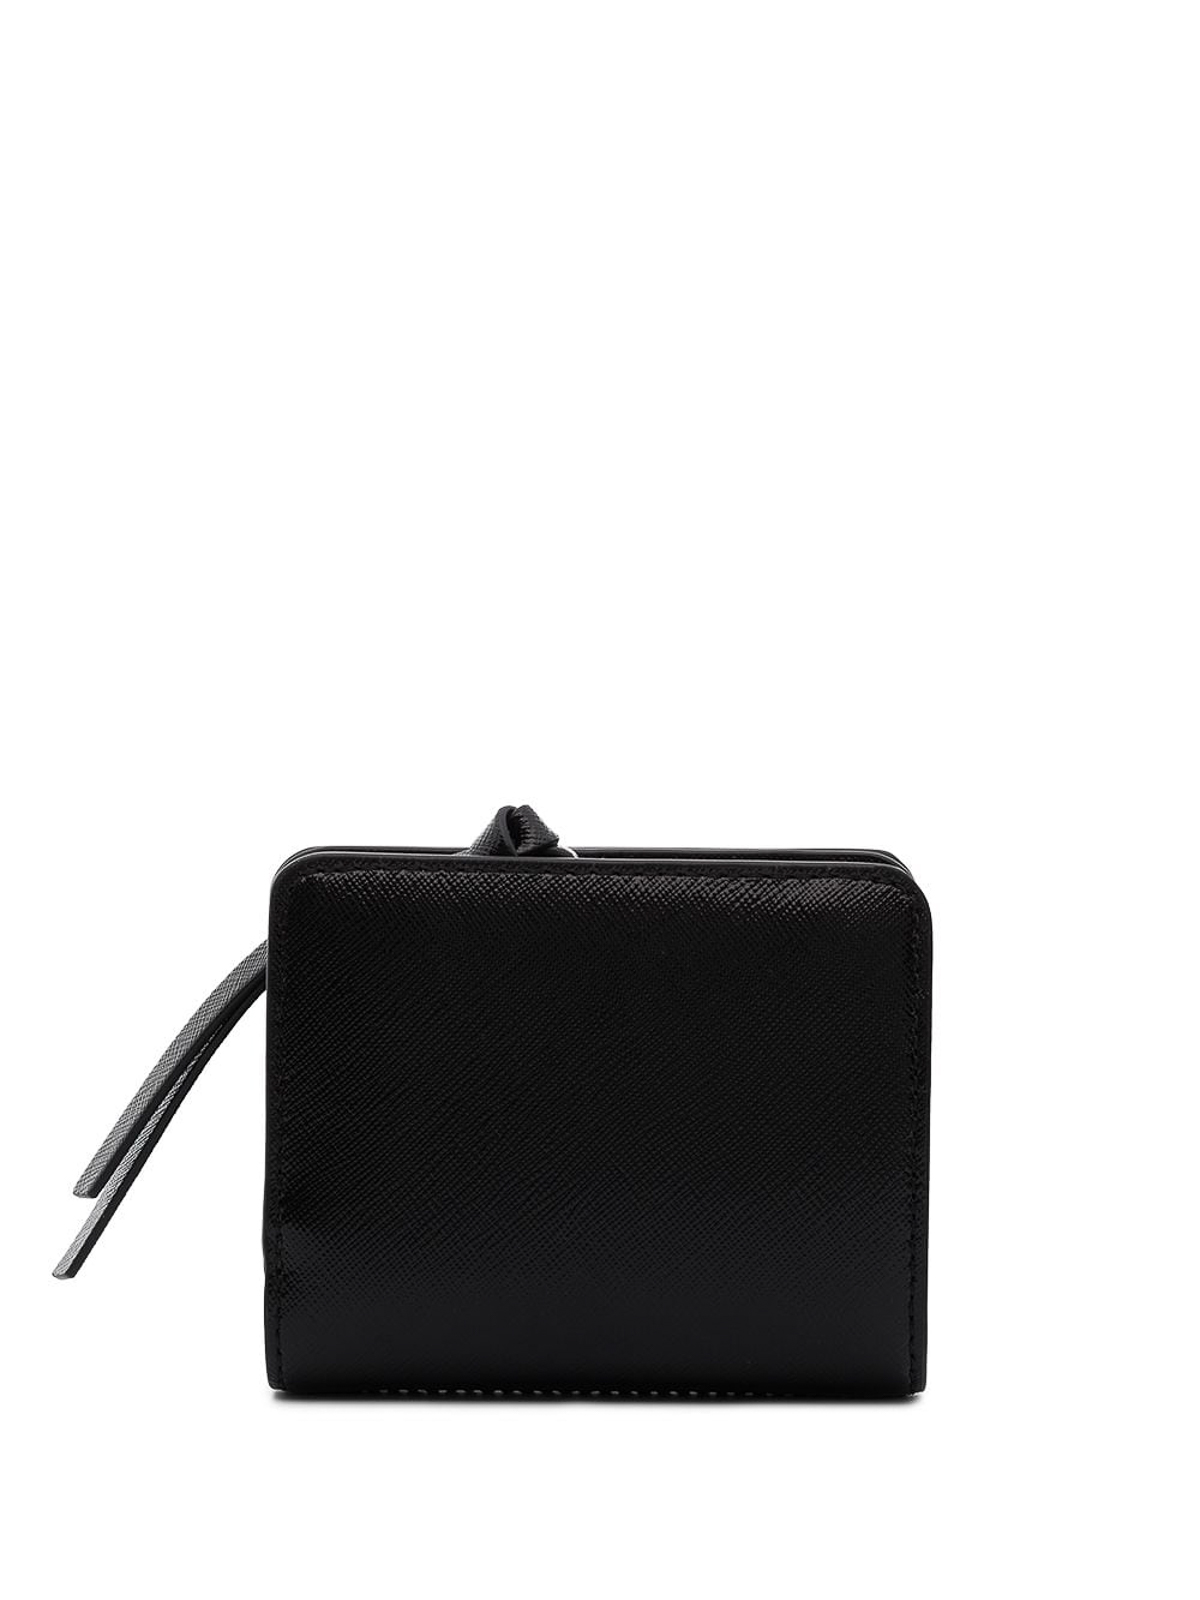 The Snapshot Mini Compact Black Leather Wallet